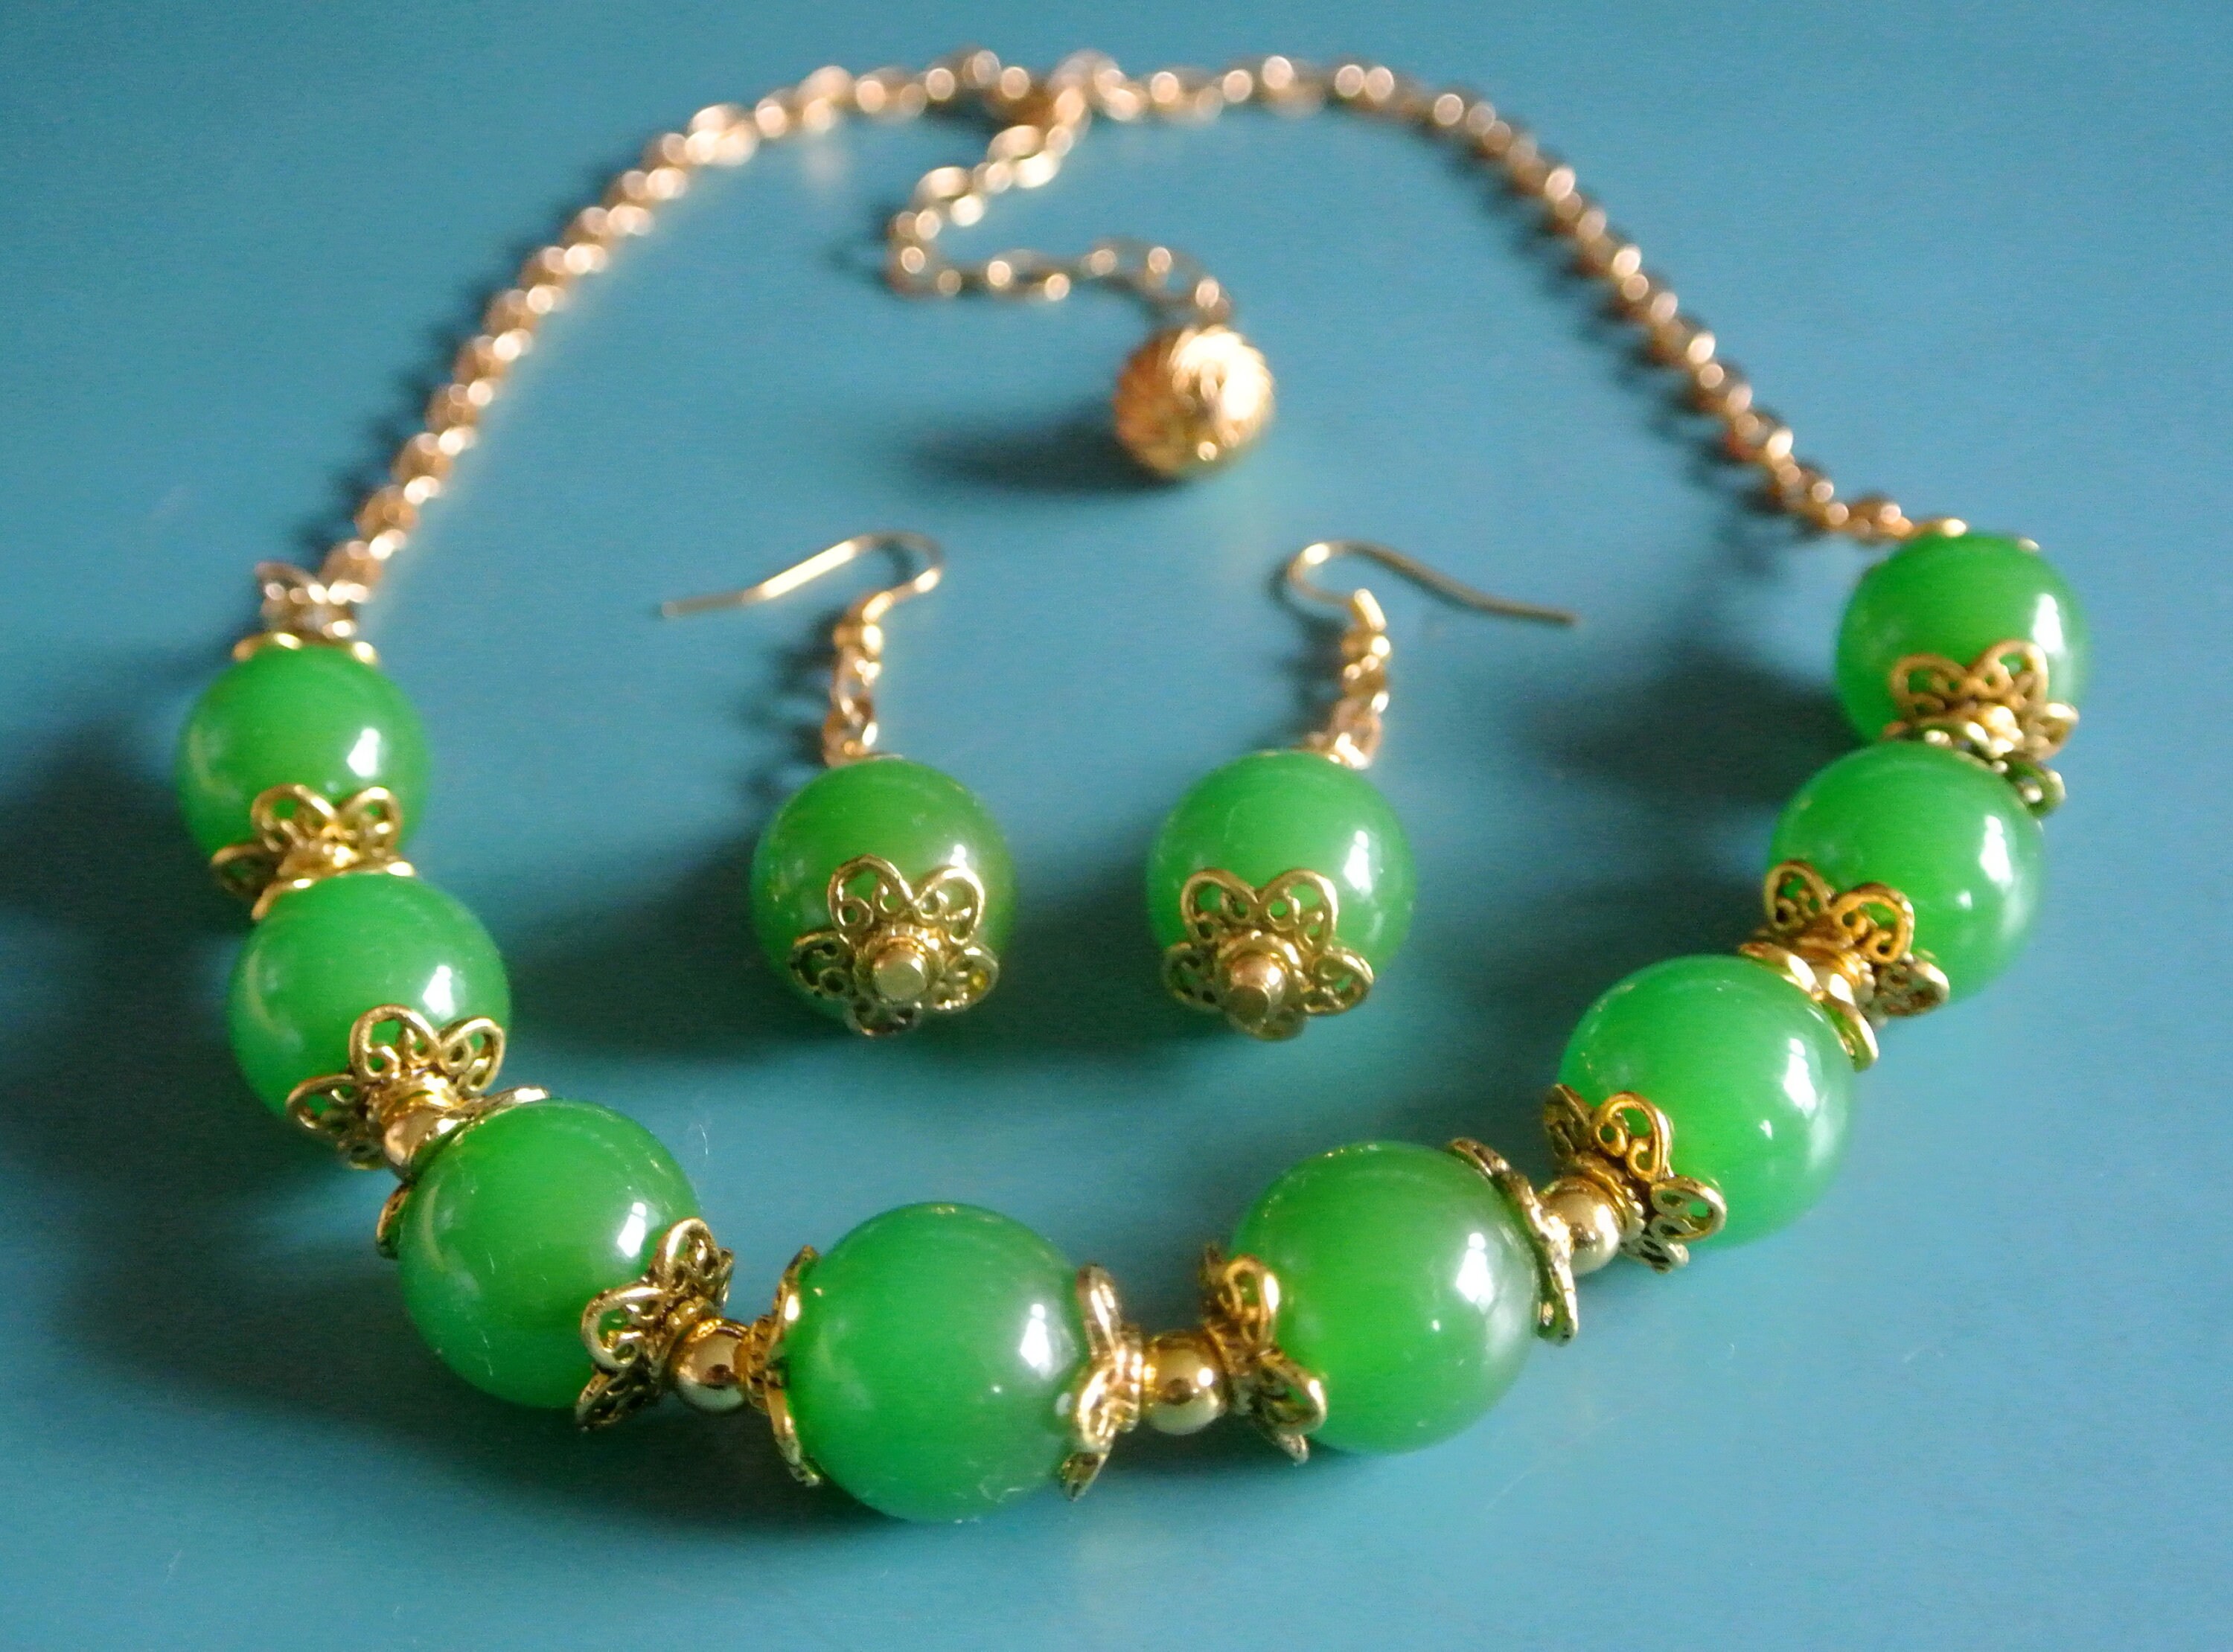 Unique one-of-a-kind necklace of ball chain with one large round flamy swirled grassgreen genuine tested vintage 1950s bakelite bead